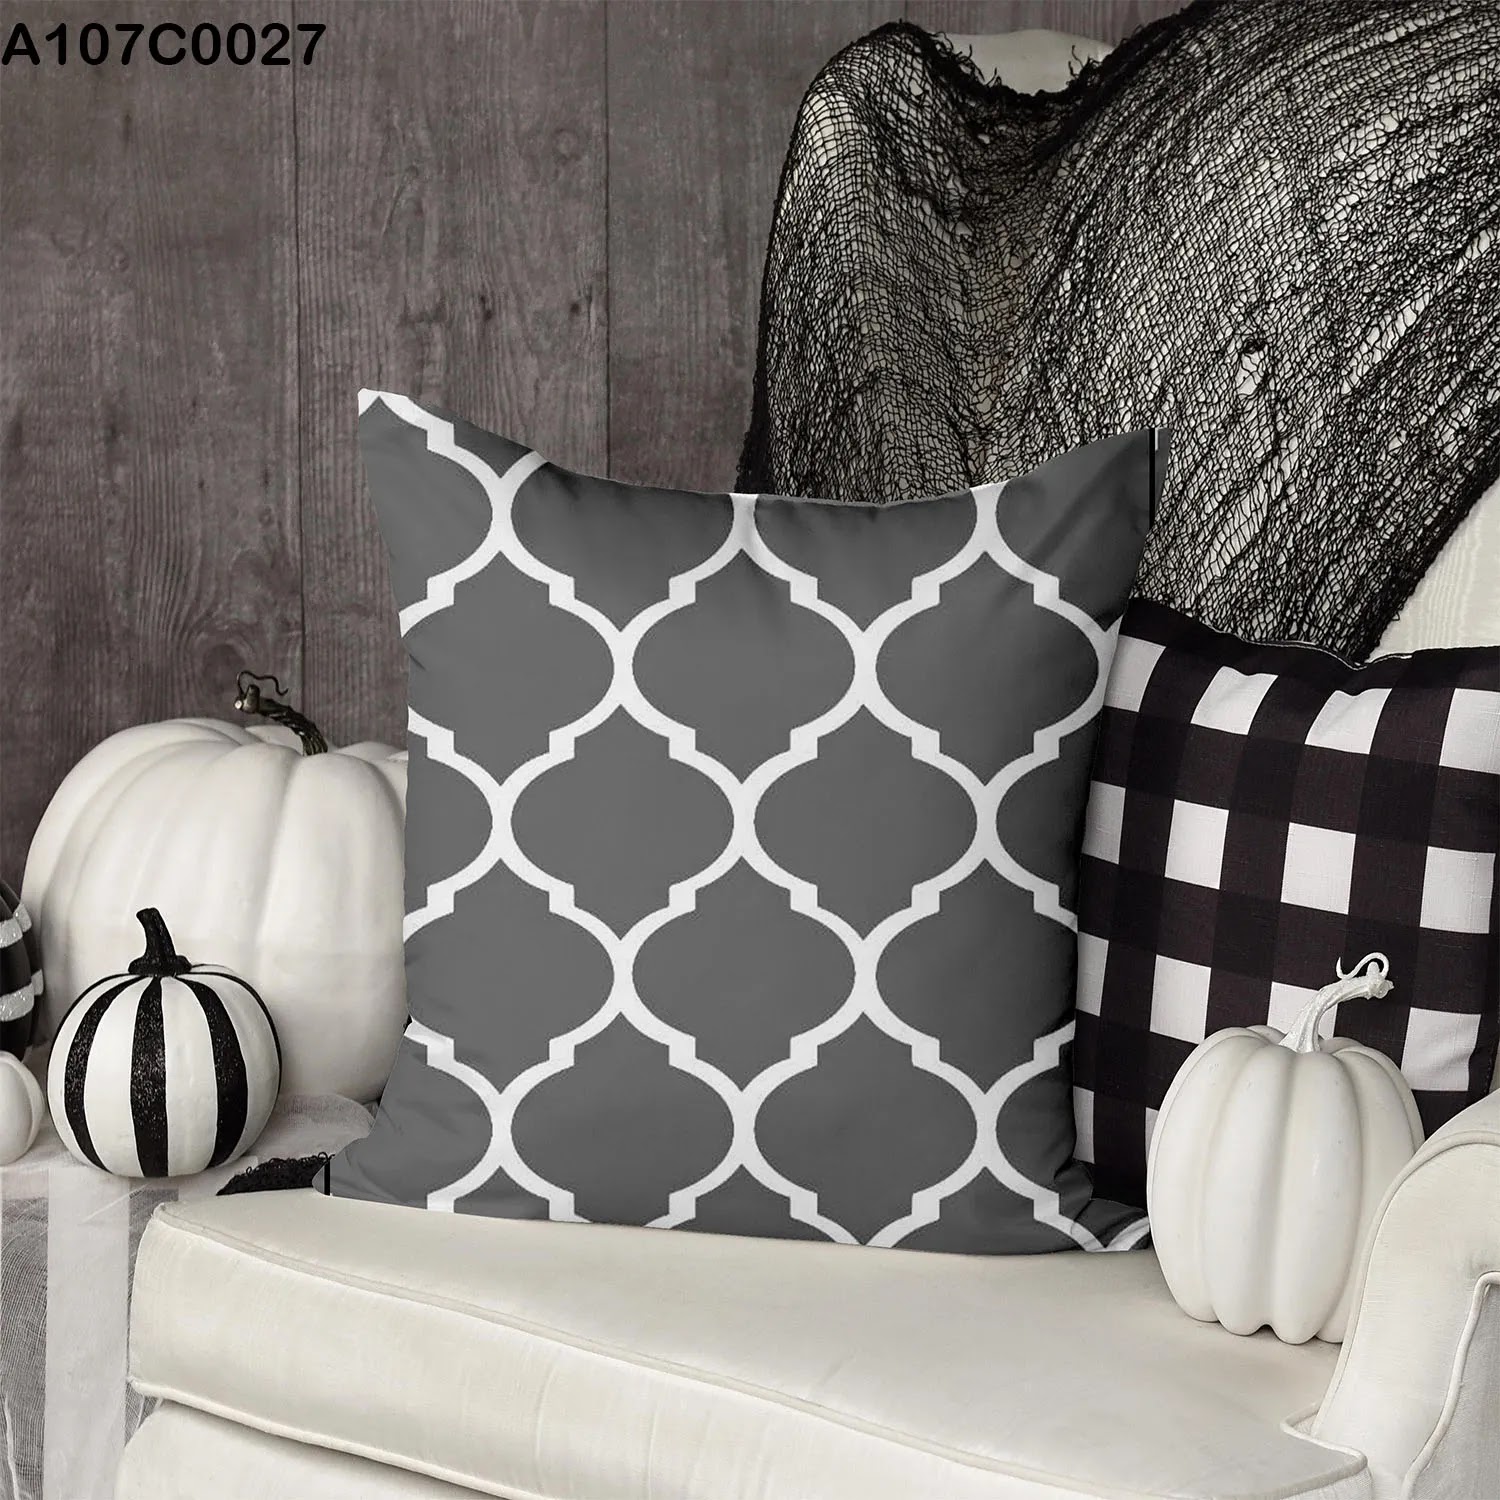 Dark gray pillow case with white lines and shapes